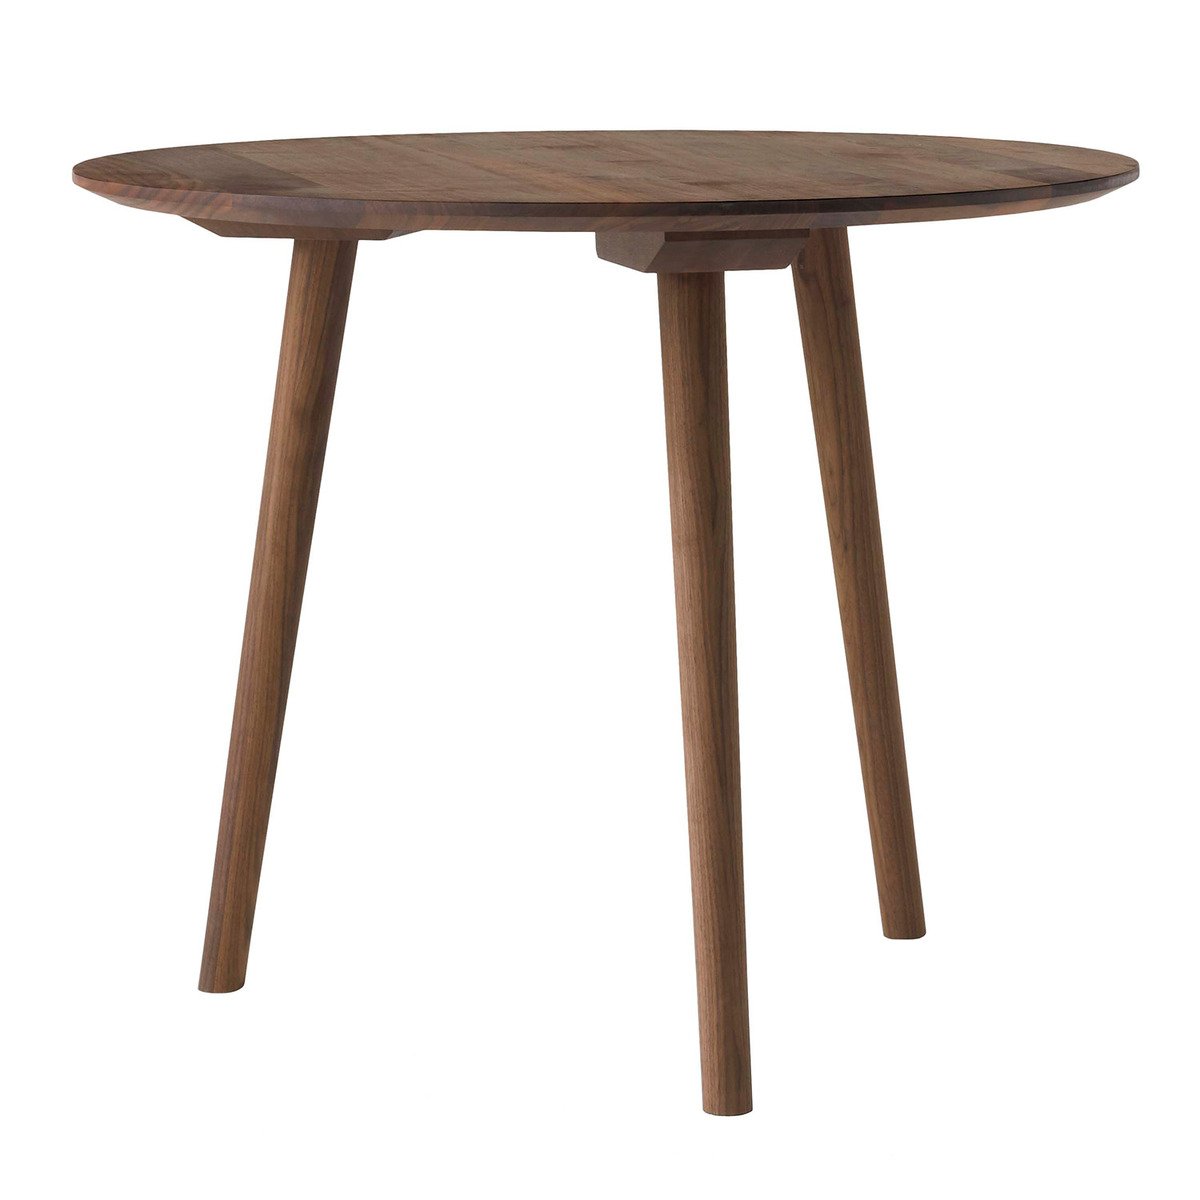 Tradition In Between Sk3 Table 90 Cm, Small Round Walnut Dining Table And Chairs Set In Nigeria